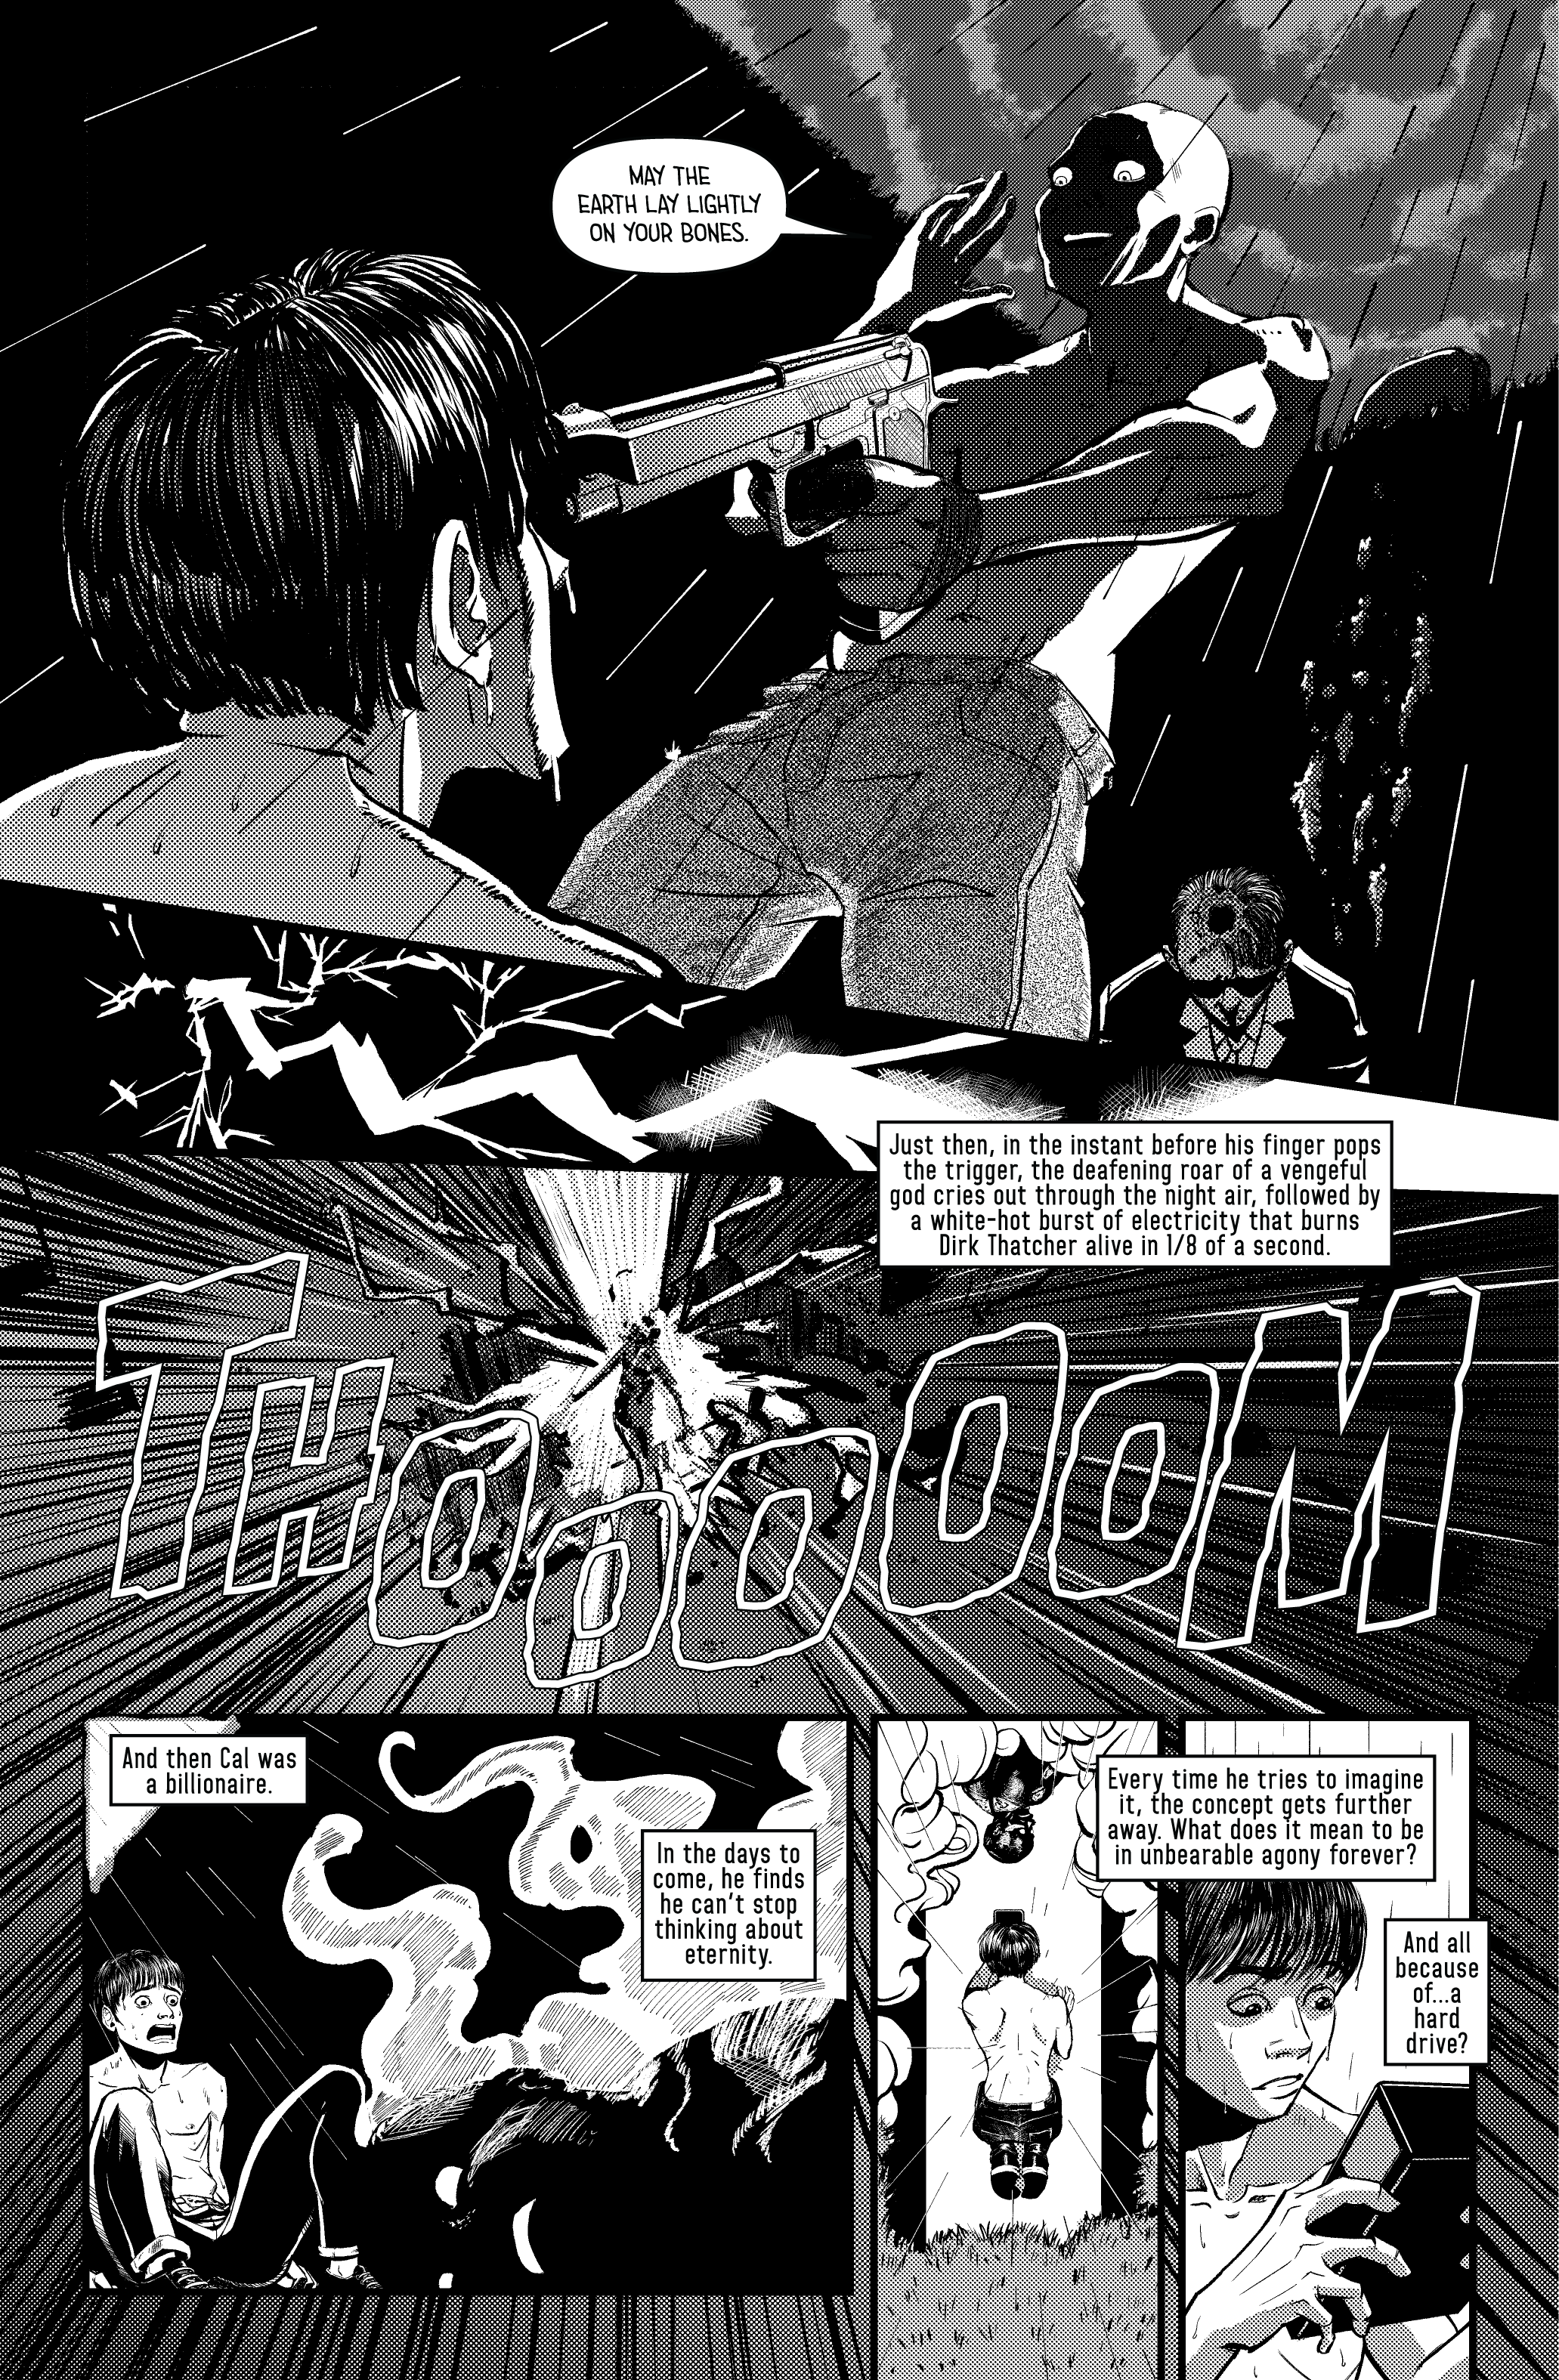 Monocul issue 07 story 01 pg 05 - Tales From The Crypto-01.png